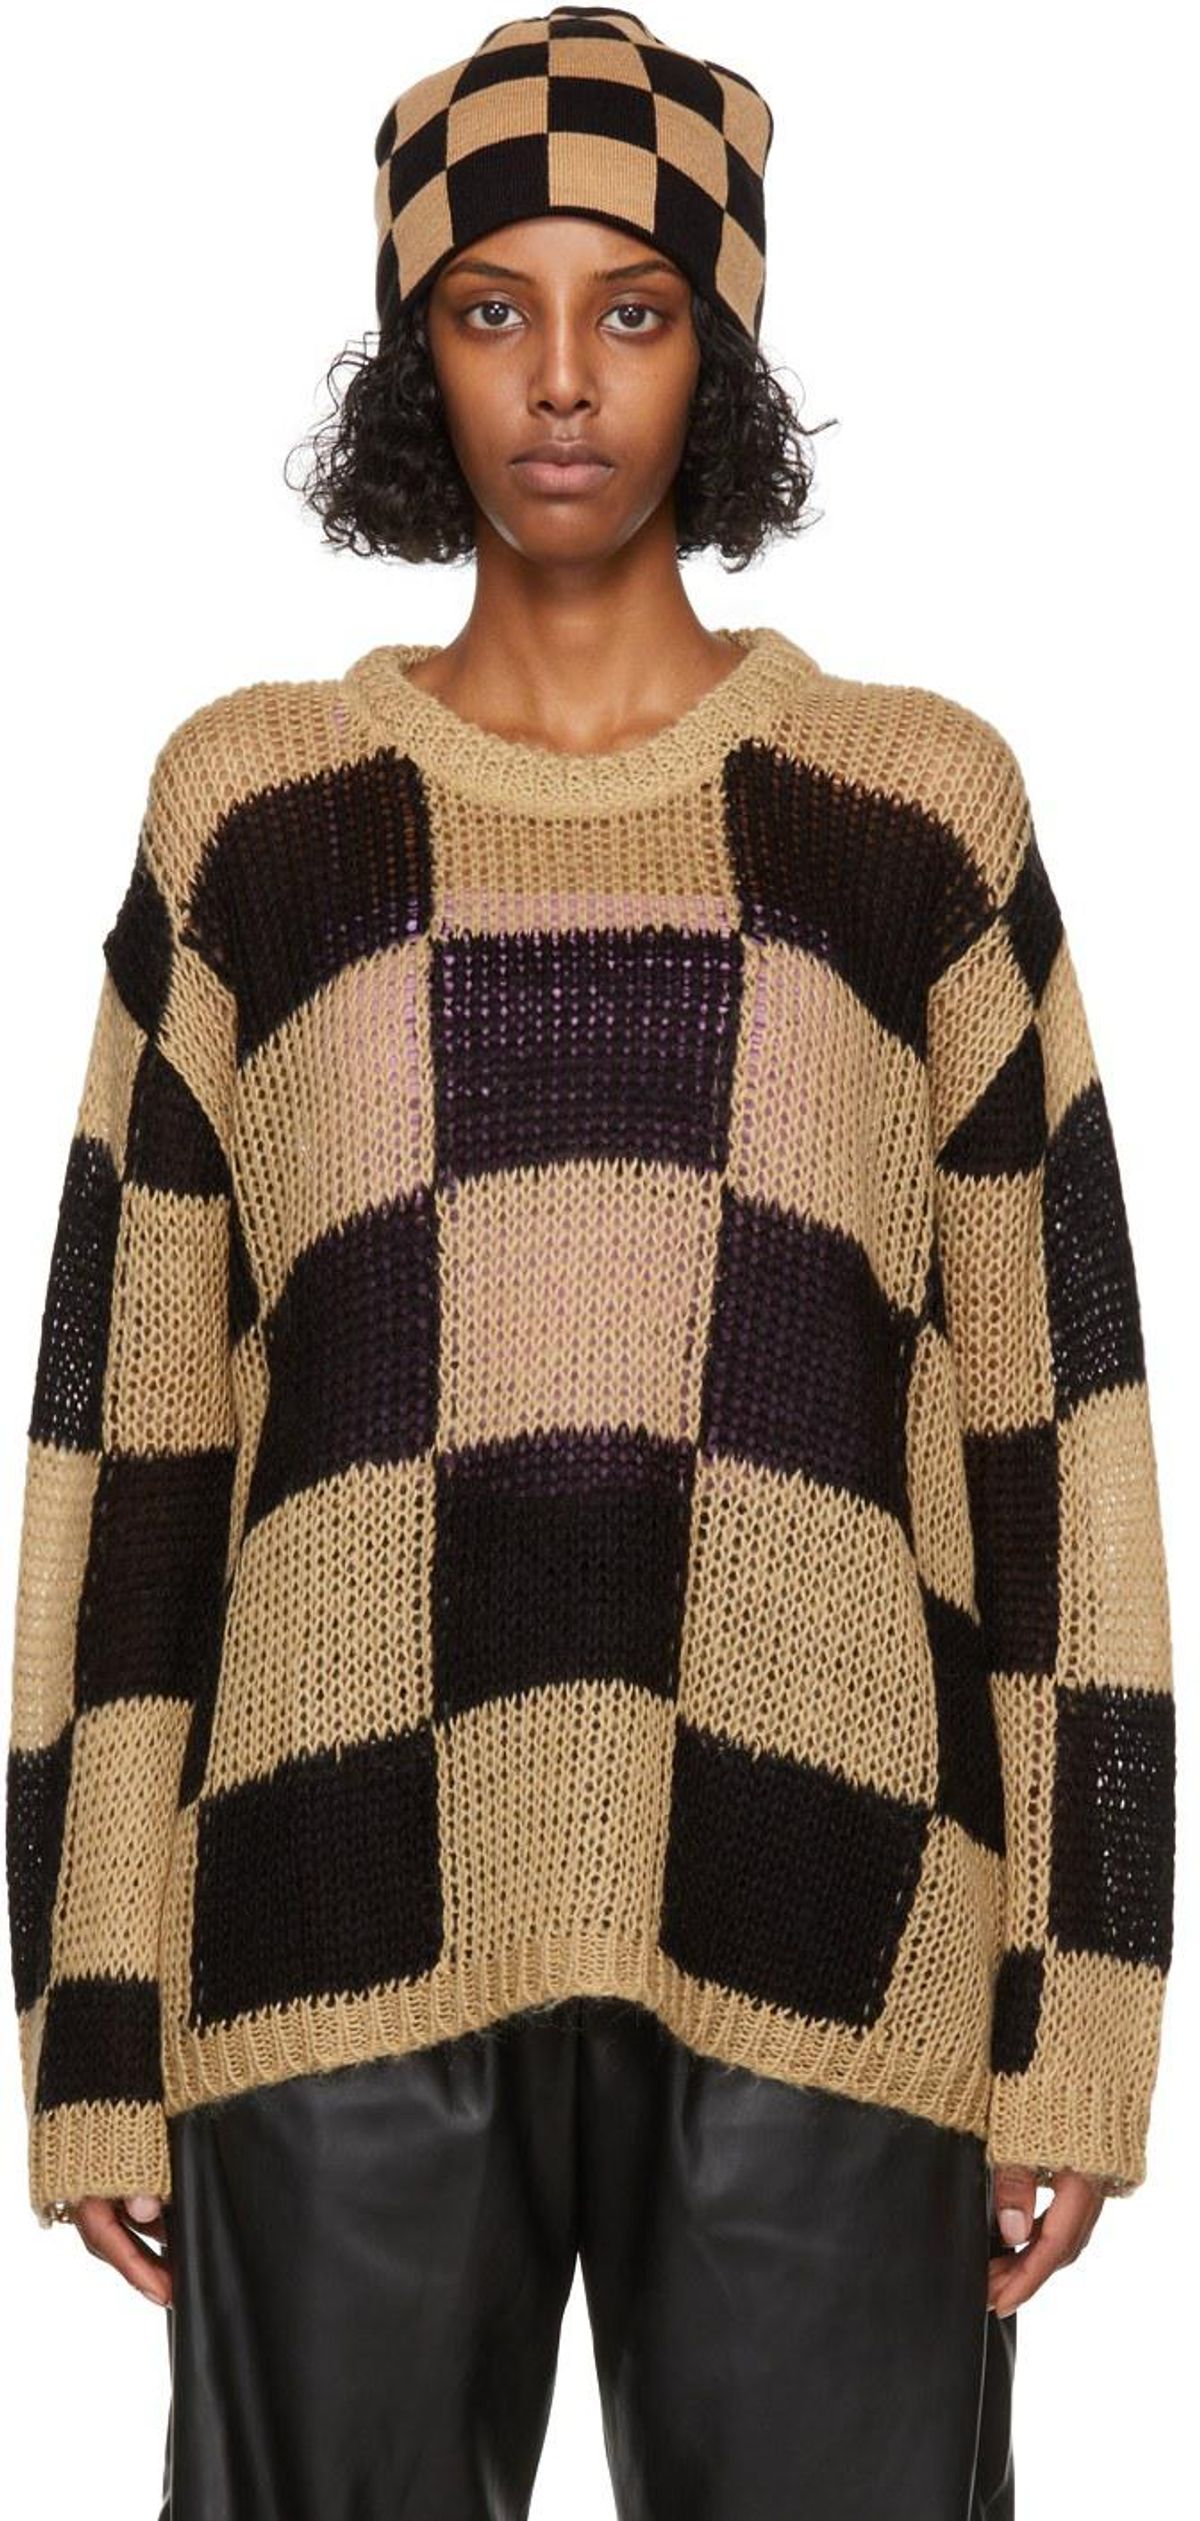 theopen product beige and black chessboard check sweater